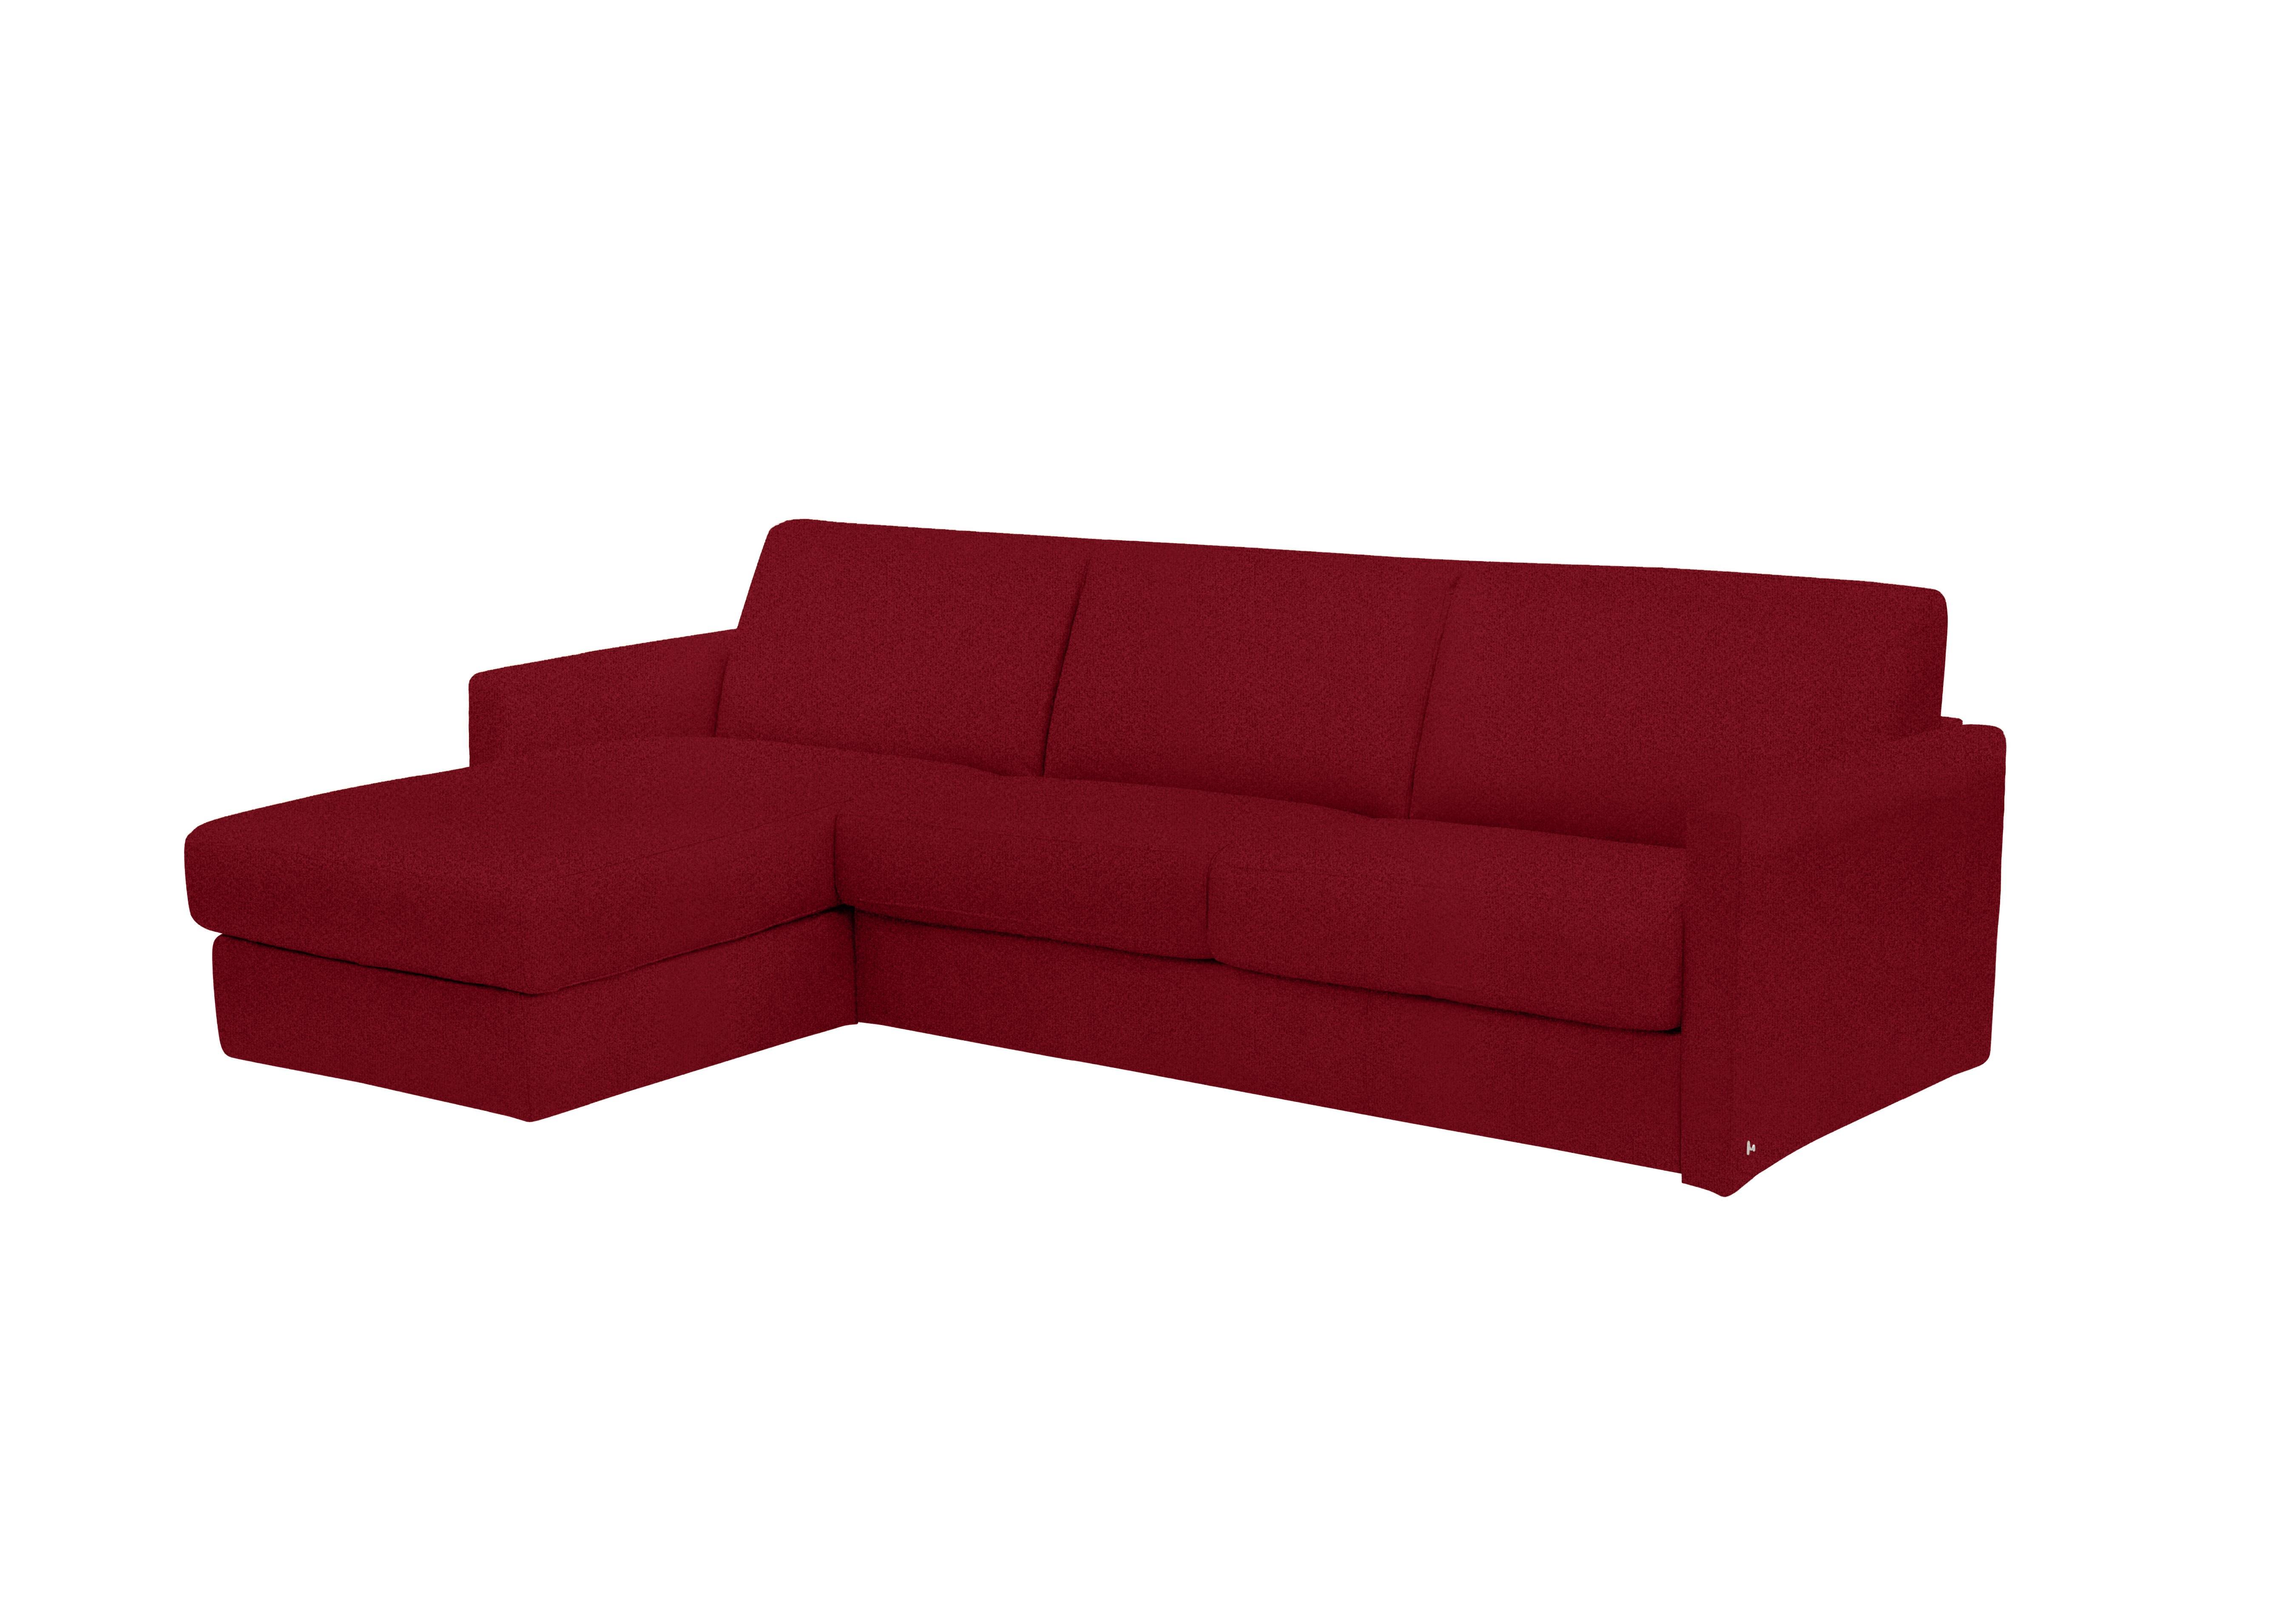 Alcova 3 Seater Fabric Sofa Bed with Storage Chaise with Slim Arms in Coupe Rosso 305 on Furniture Village